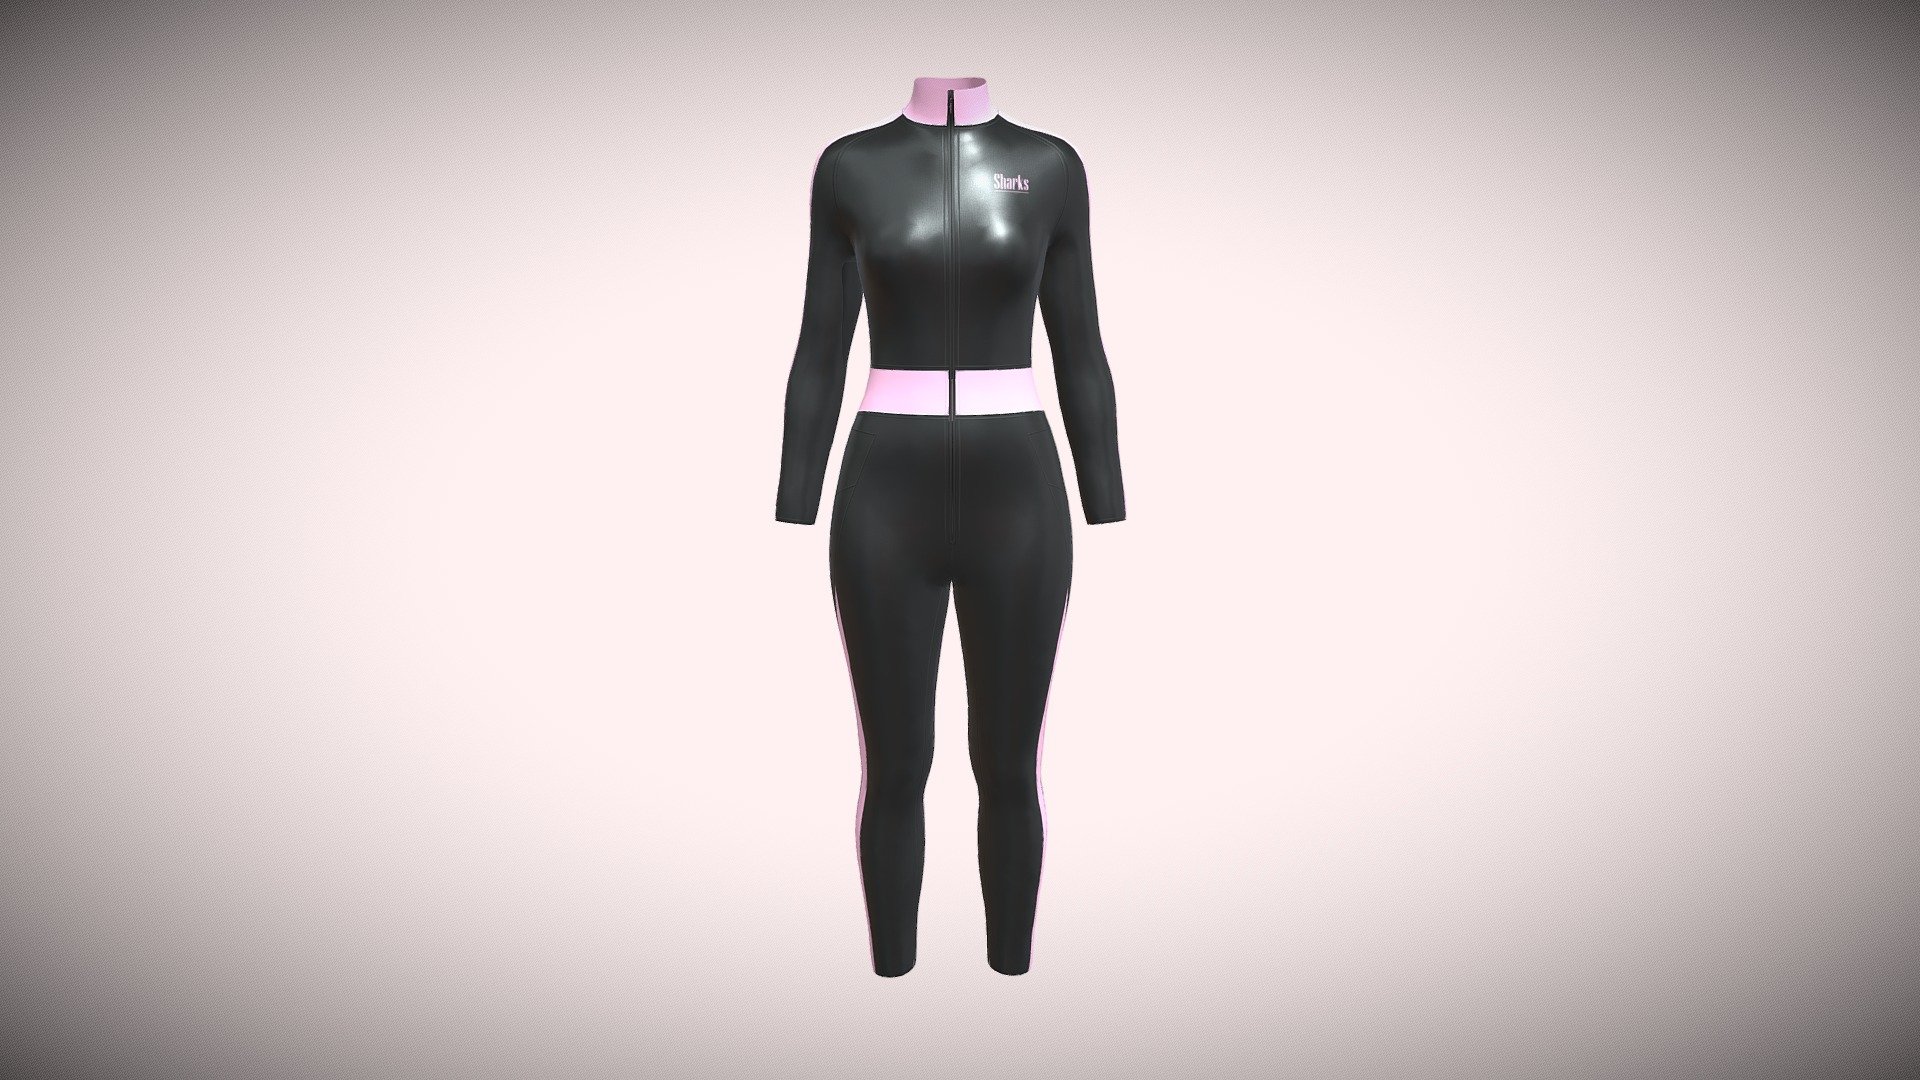 Ladies Swimming Tracksuit

I am a Professional 3D Fashion/Apprel Designer. I have 7 years working experience about 3D Fashion. I am working with Clo3d, Marvelous Designer (MD), Daz3d, Blender, Cinema4d, Etc.

Features:
1.  2k UV Texture
2.  Triangle mesh
3.  Textures with Non-overlapping UV Map (2048x2048 Pixels)
4.  In additonal Textures folder have diffuse,displacement,metalness,normal,opacity,roughness maps.

Attachment Fils:
Exported Files (All are exported in DAZ Studio scale)
* OBJ
* FBX
* Marvelous Designer/Clo3d file (zprj)

Thanks 3d model